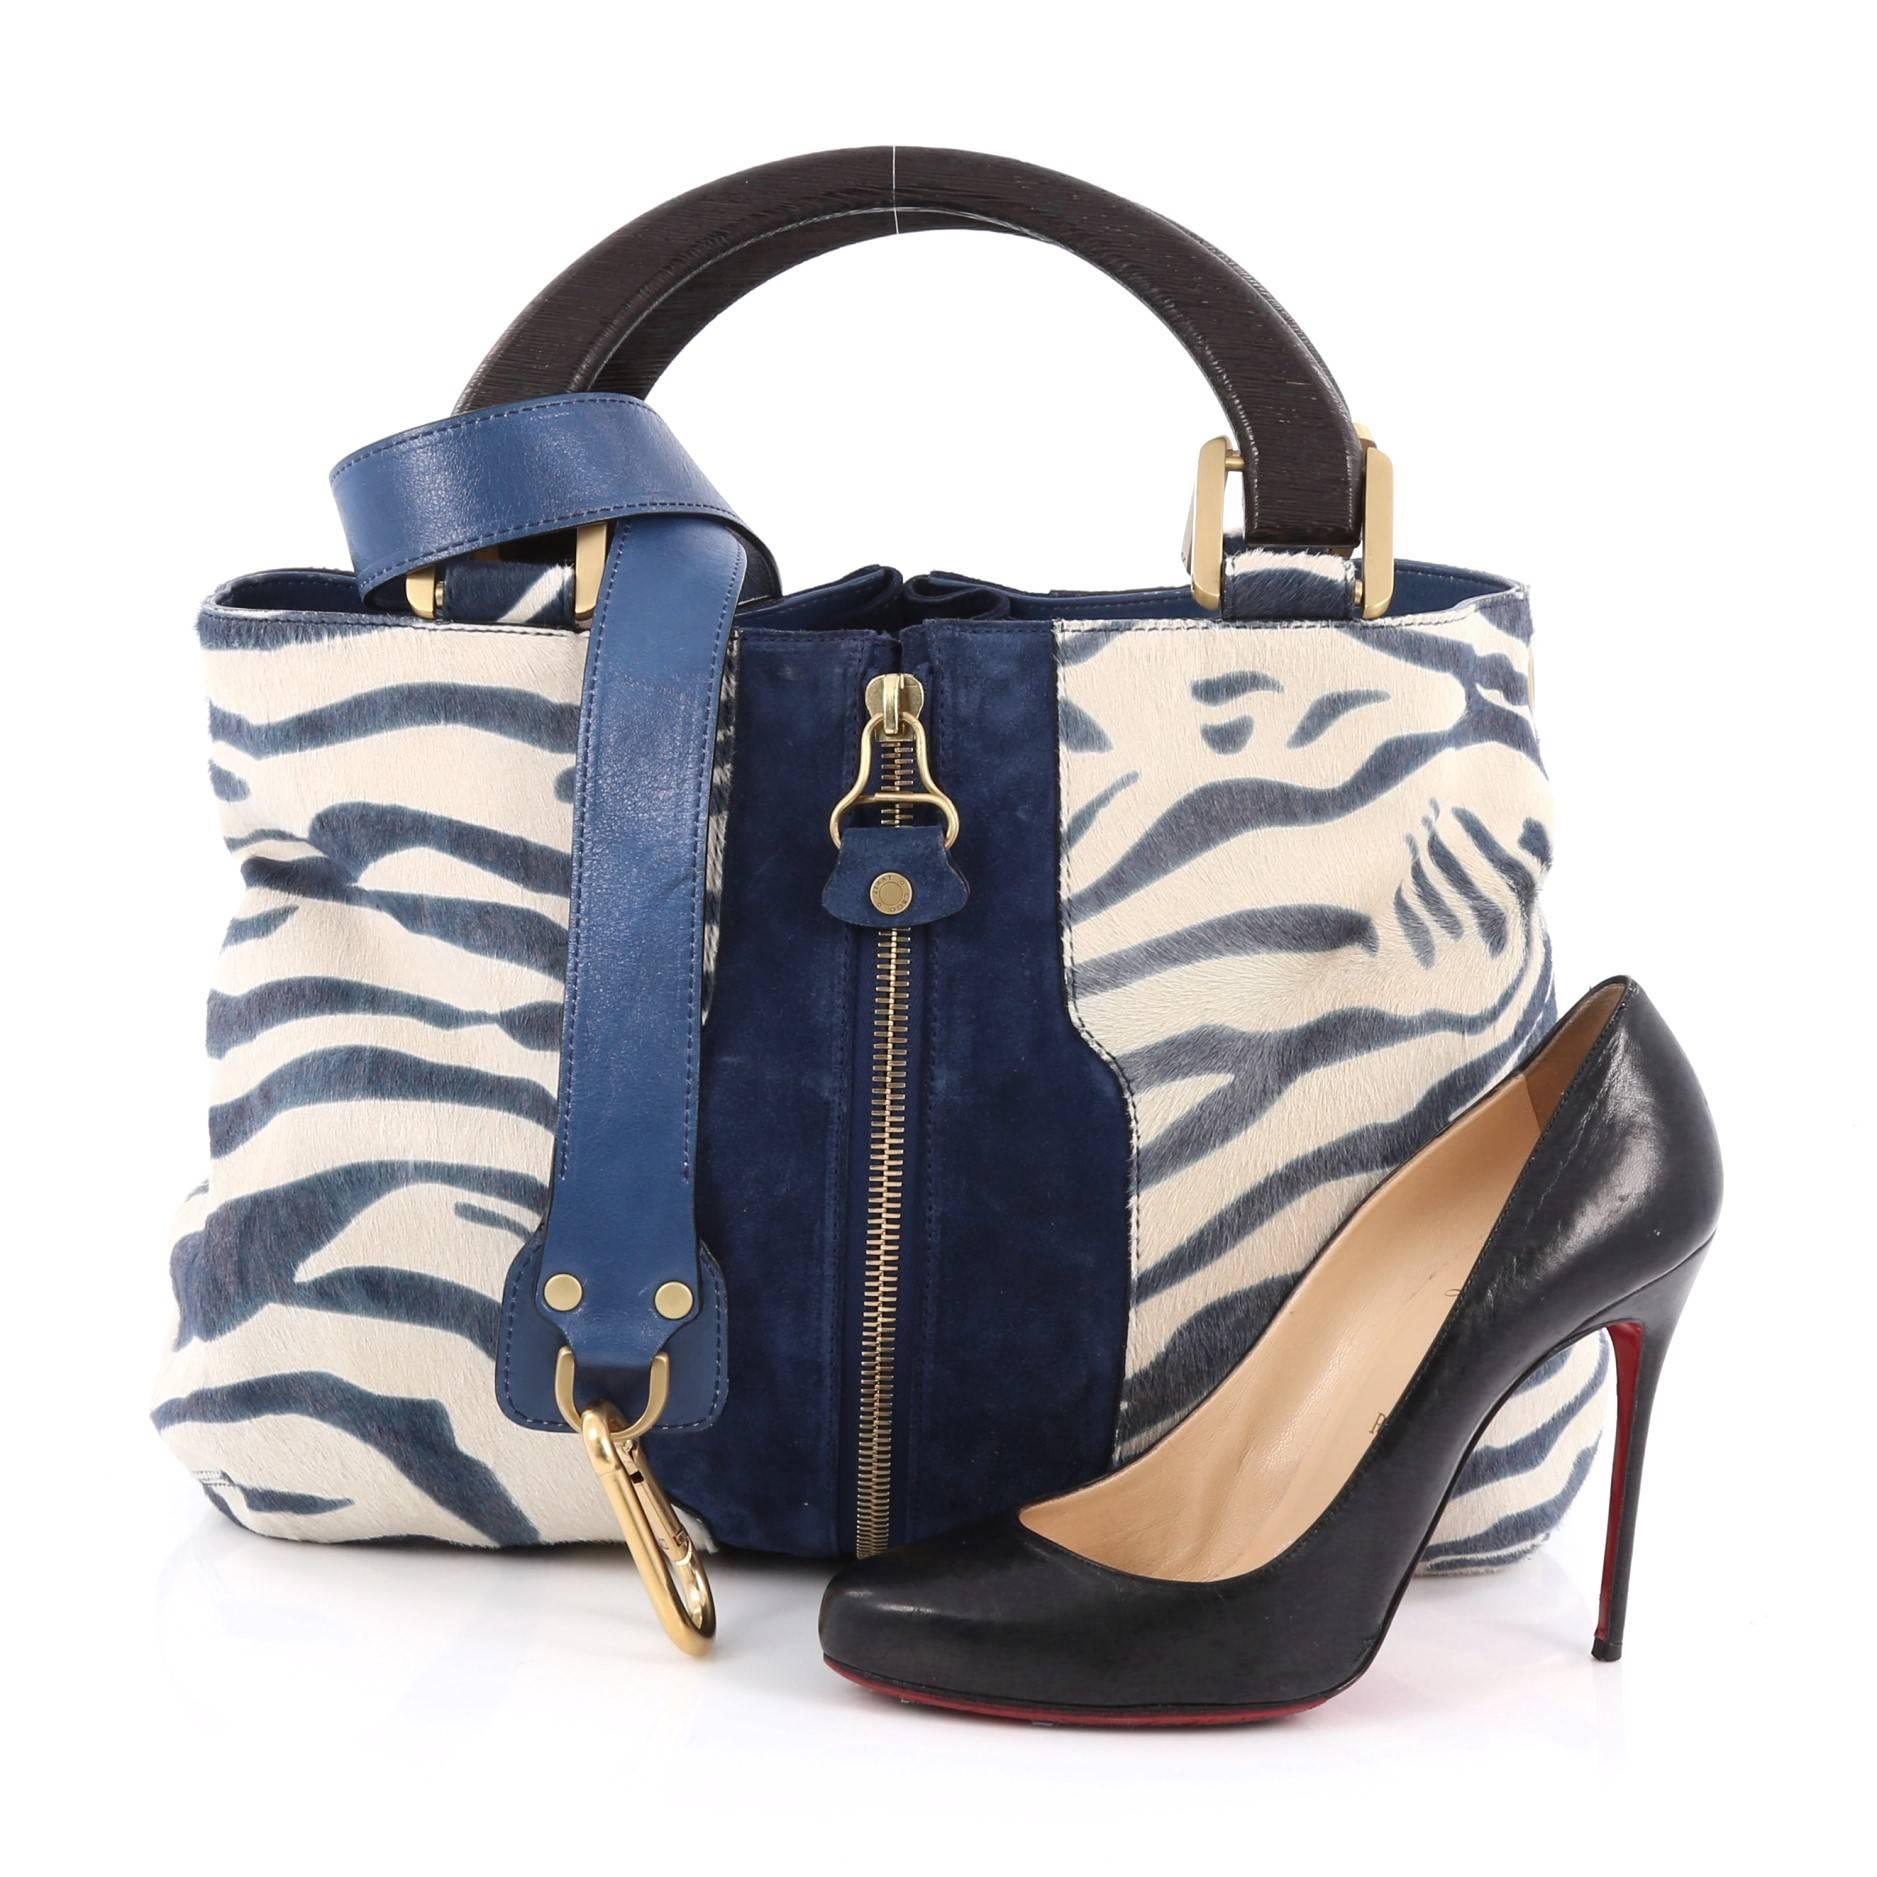 This authentic Jimmy Choo Maia Tote Pony Hair Medium is an eye catching piece perfect for bold fashionistas. Crafted in blue and white genuine pony hair, this bag features dual wooden handles, detachable strap, front and back extension zippers and